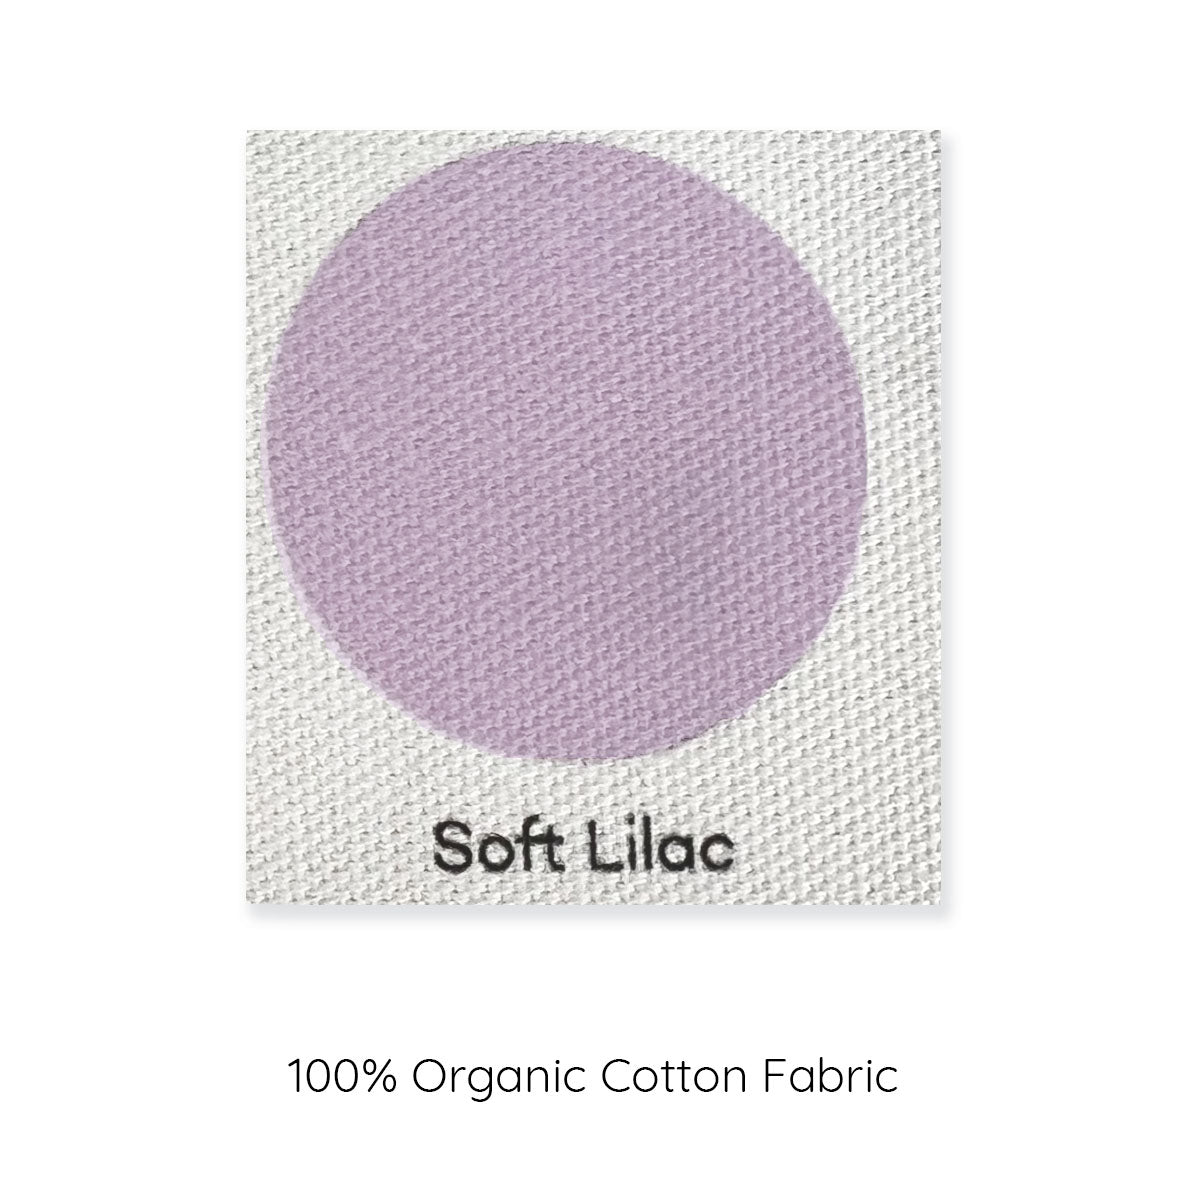 soft lilac colour swatch example.